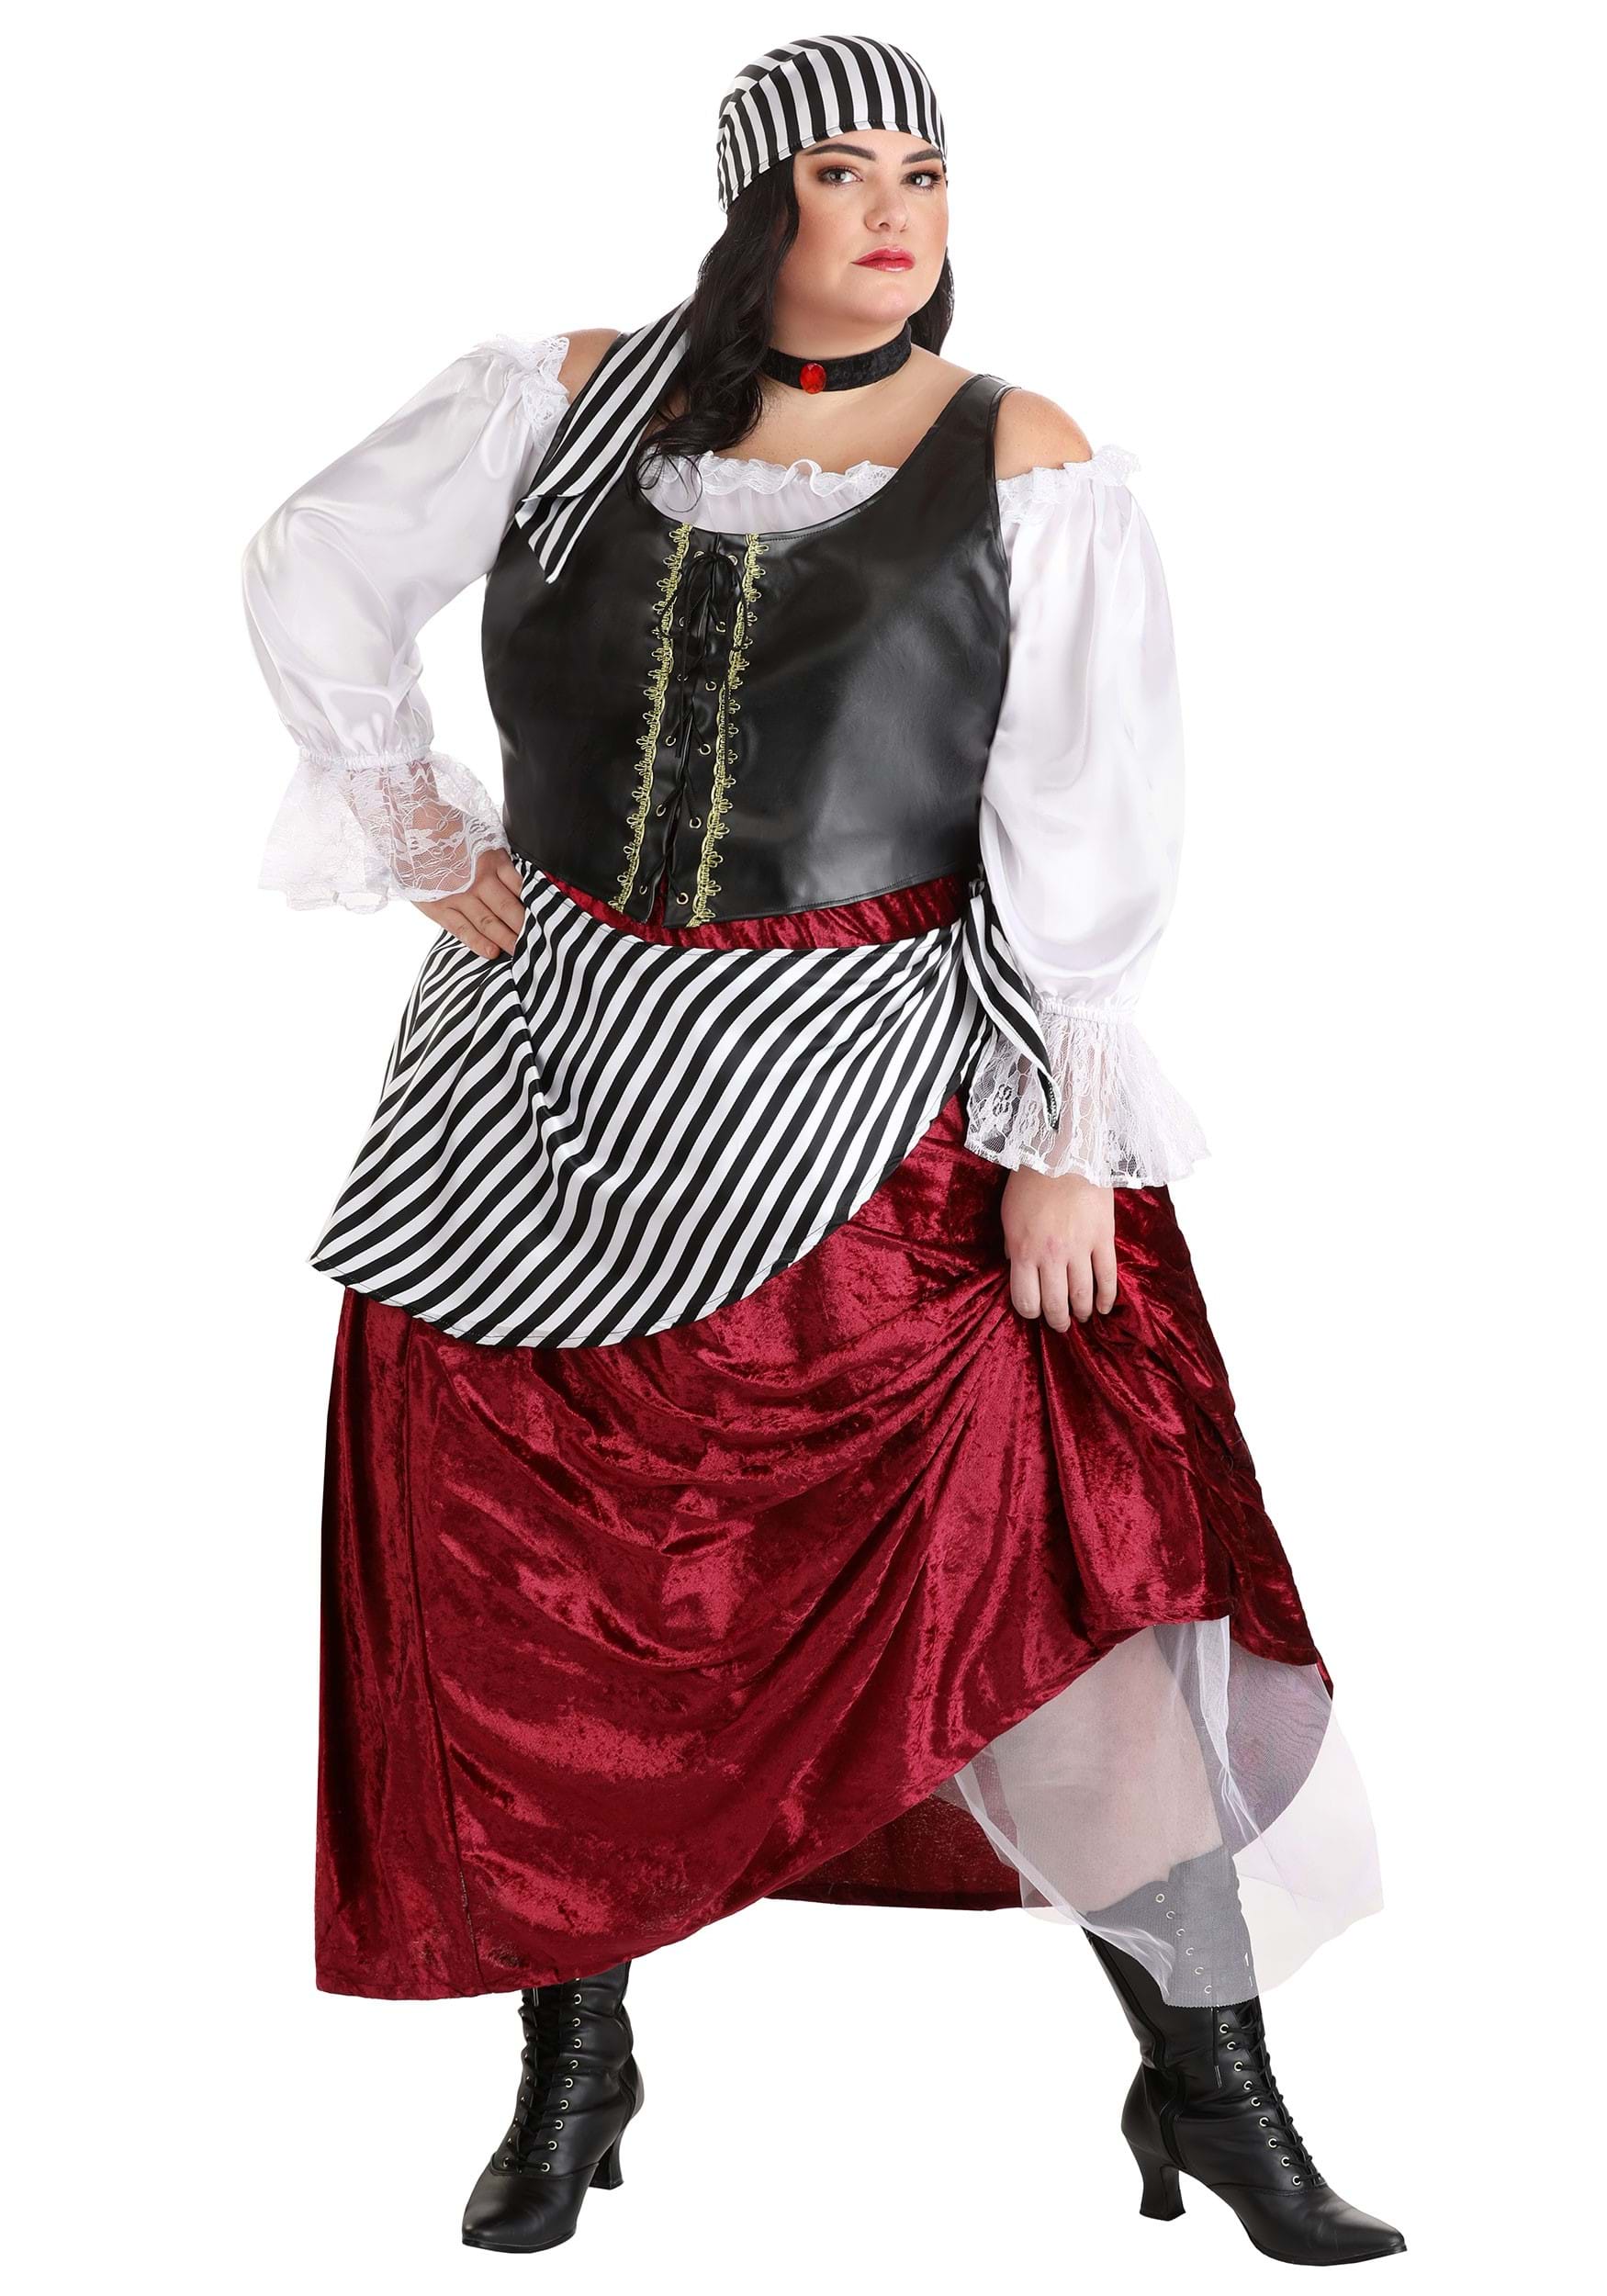 Plus Size Deluxe Pirate Wench Fancy Dress Costume , Pirate Dress